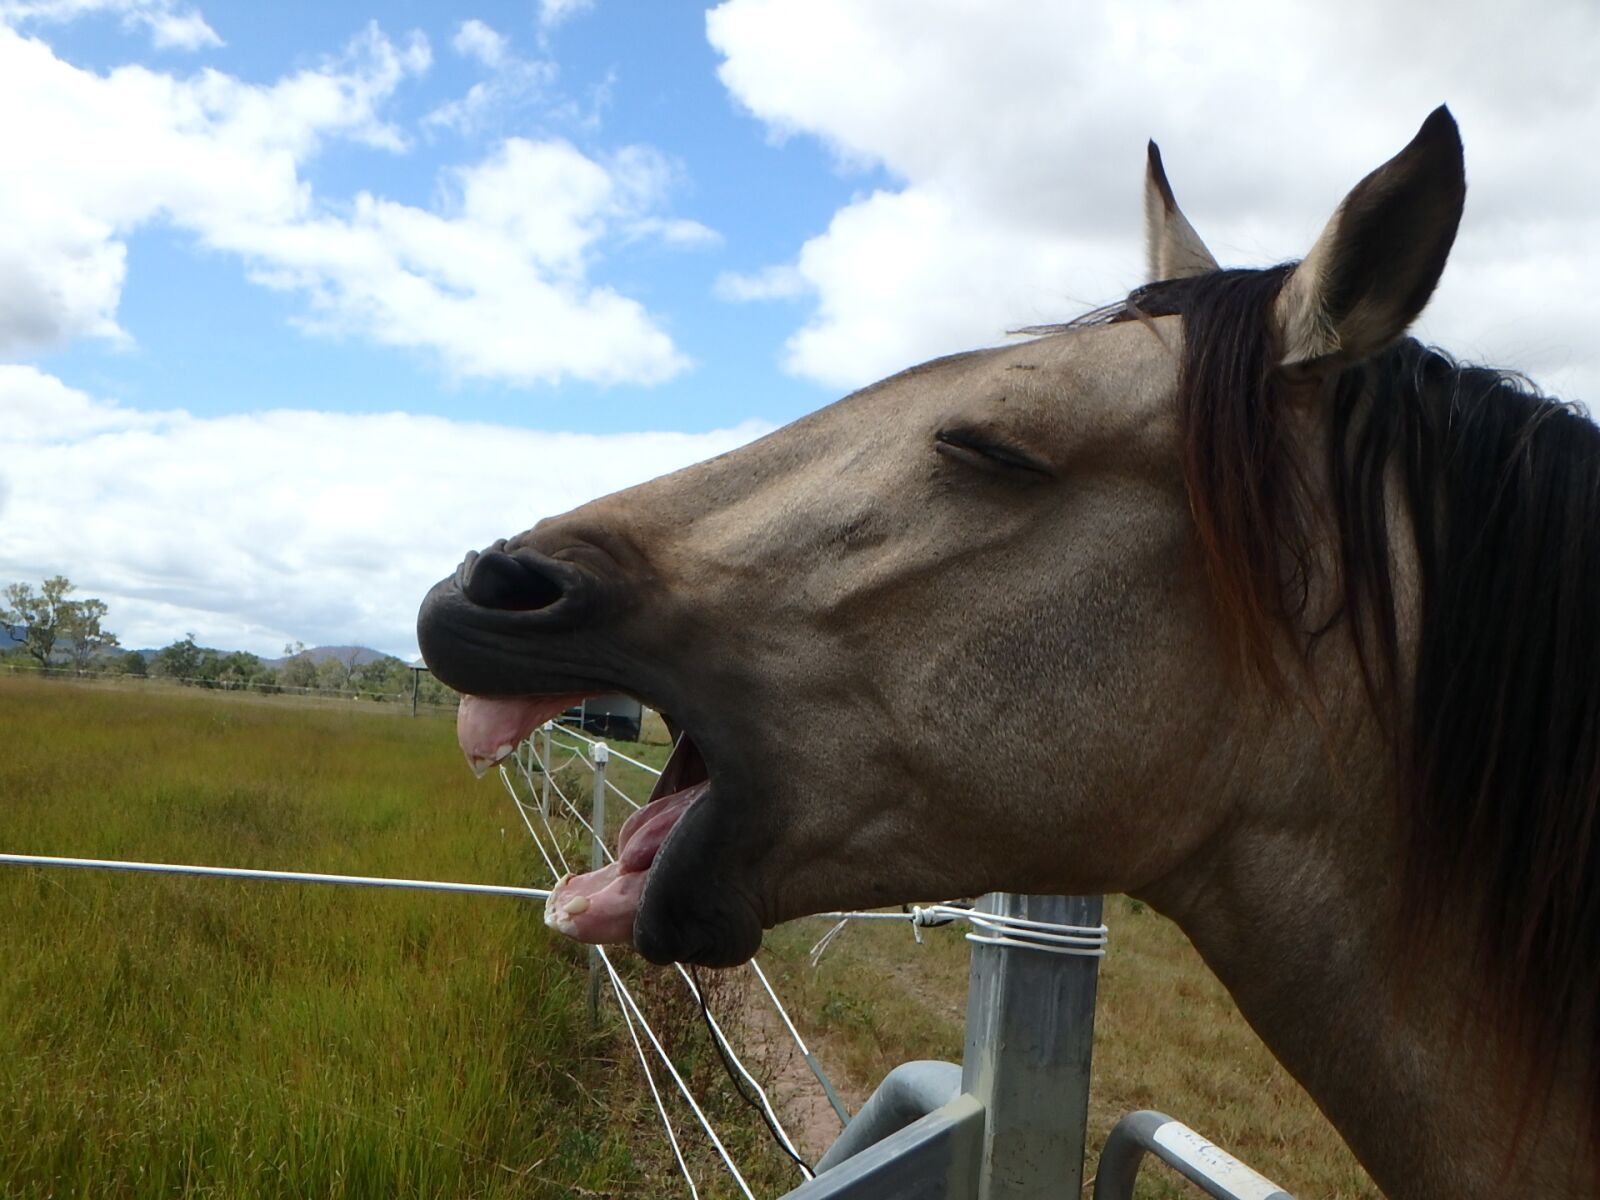 Olympus TG-860 sample photo. Horse, laughter, animal photography